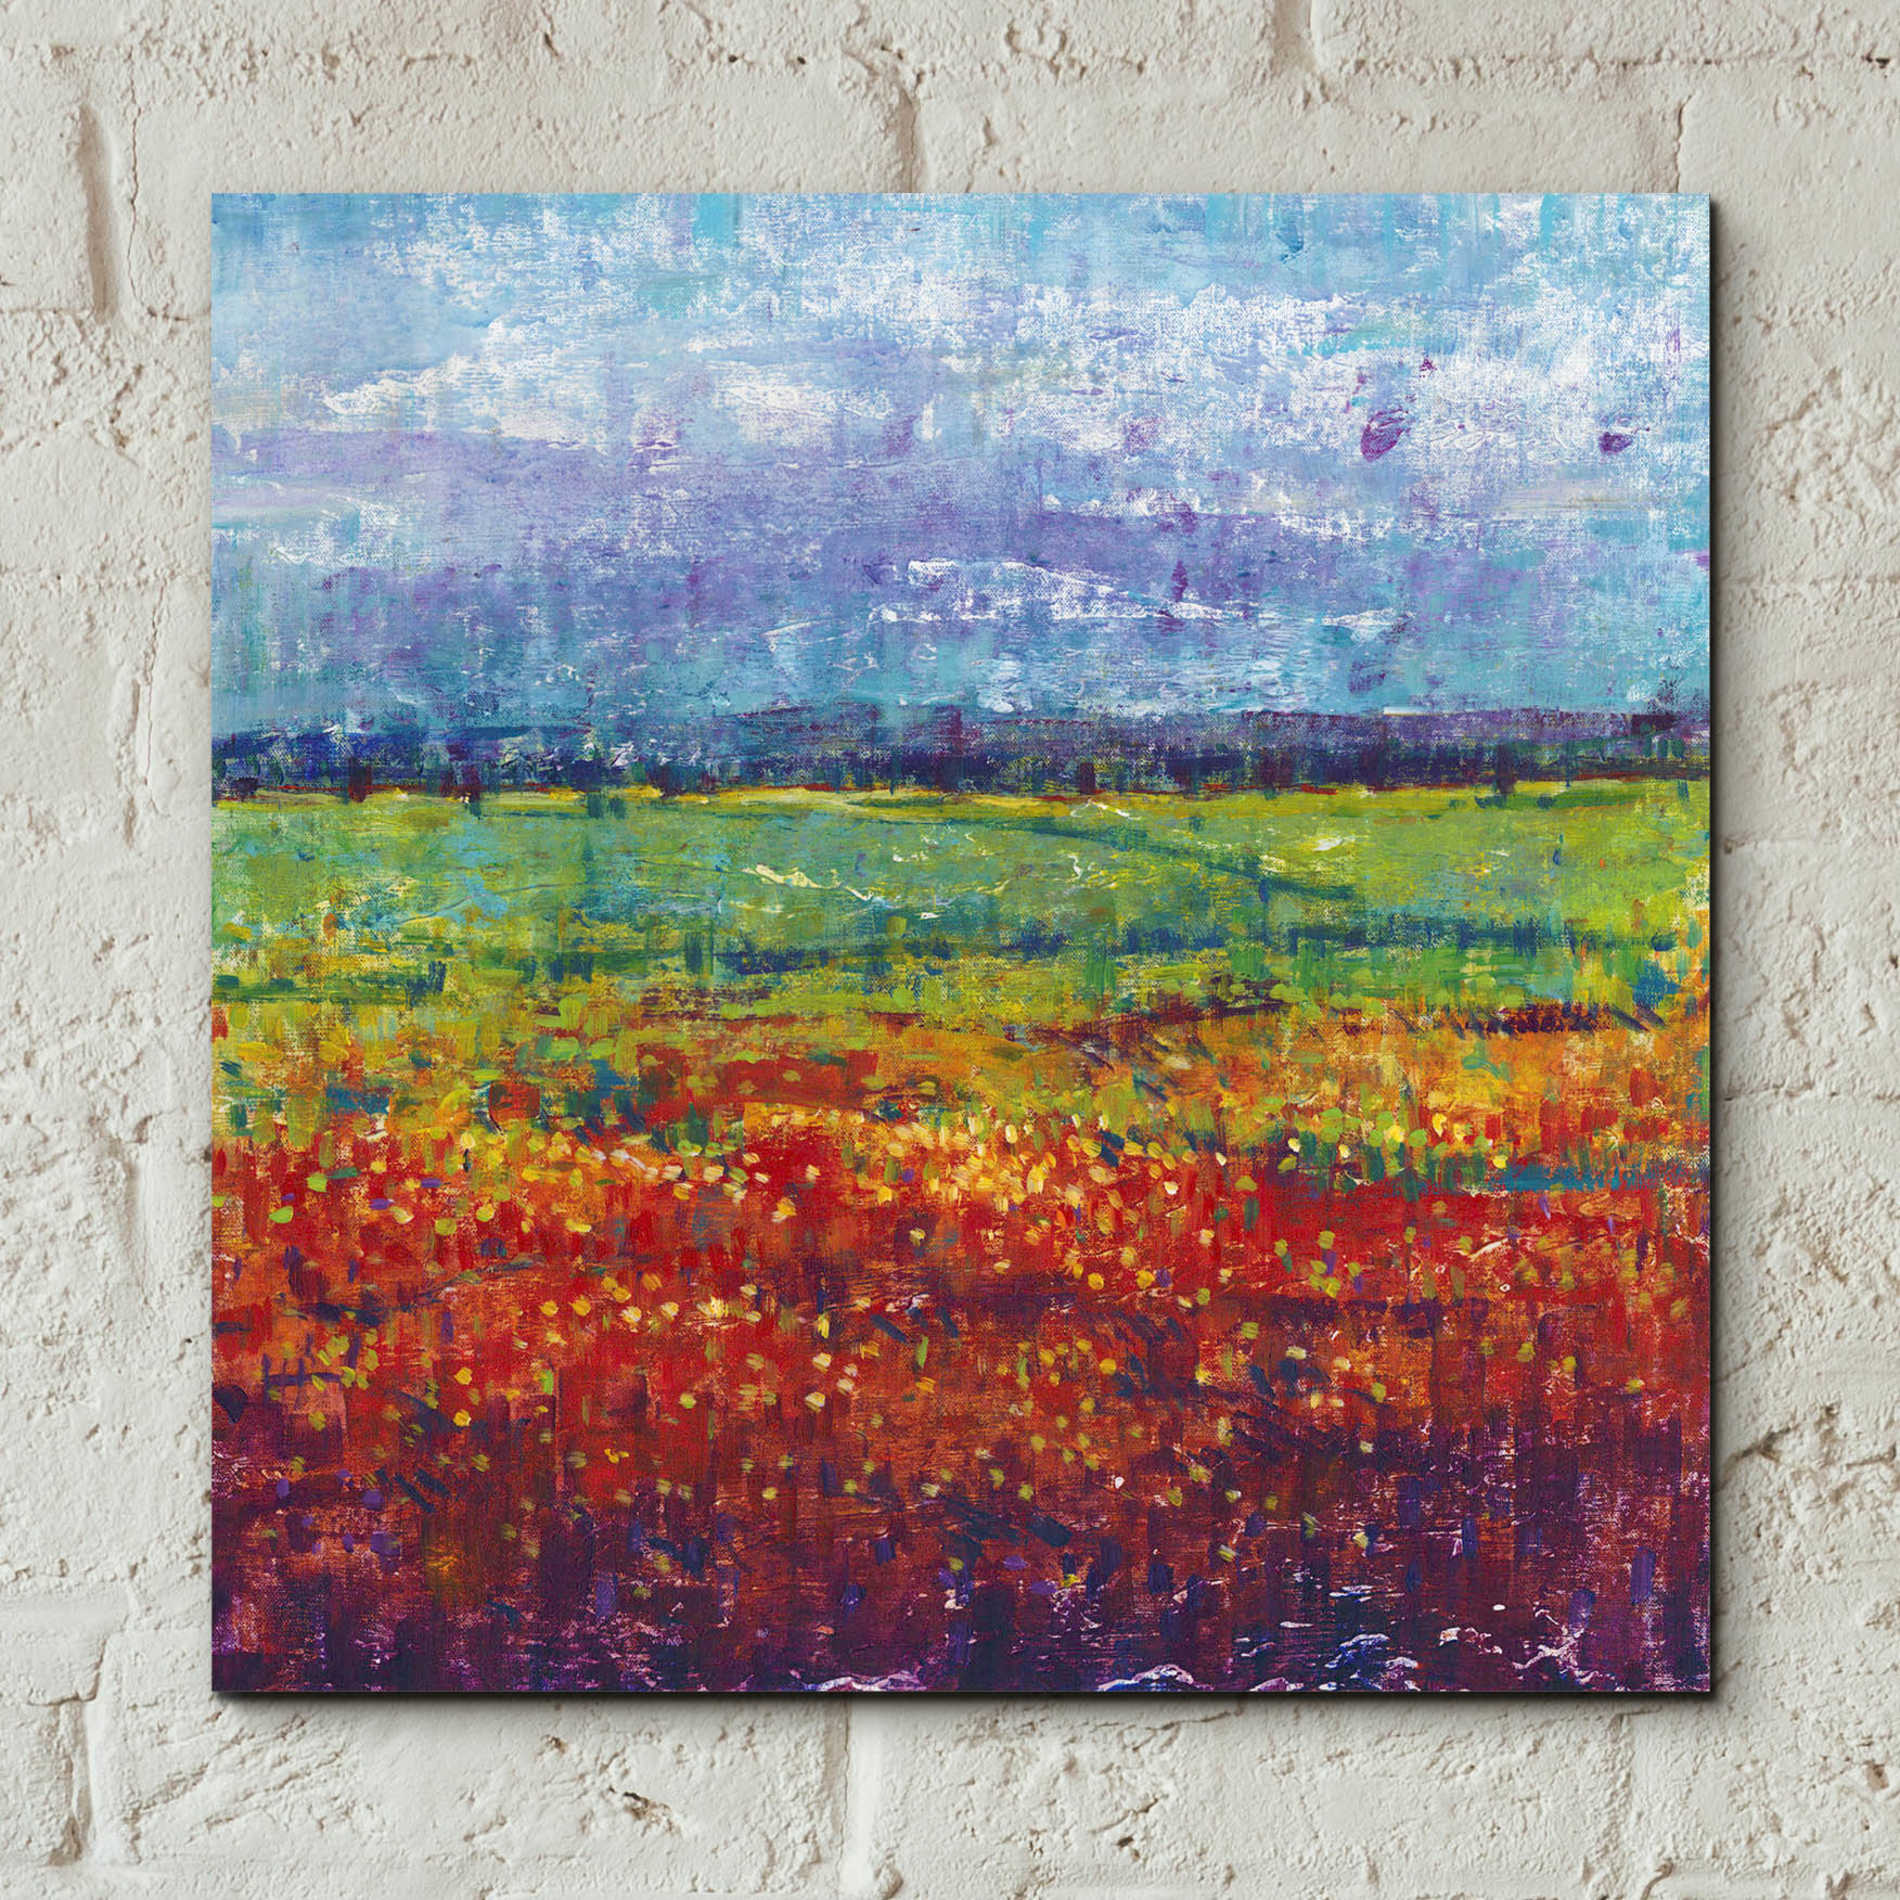 Epic Art 'On Summer Day I' by Tim O'Toole, Acrylic Glass Wall Art,12x12